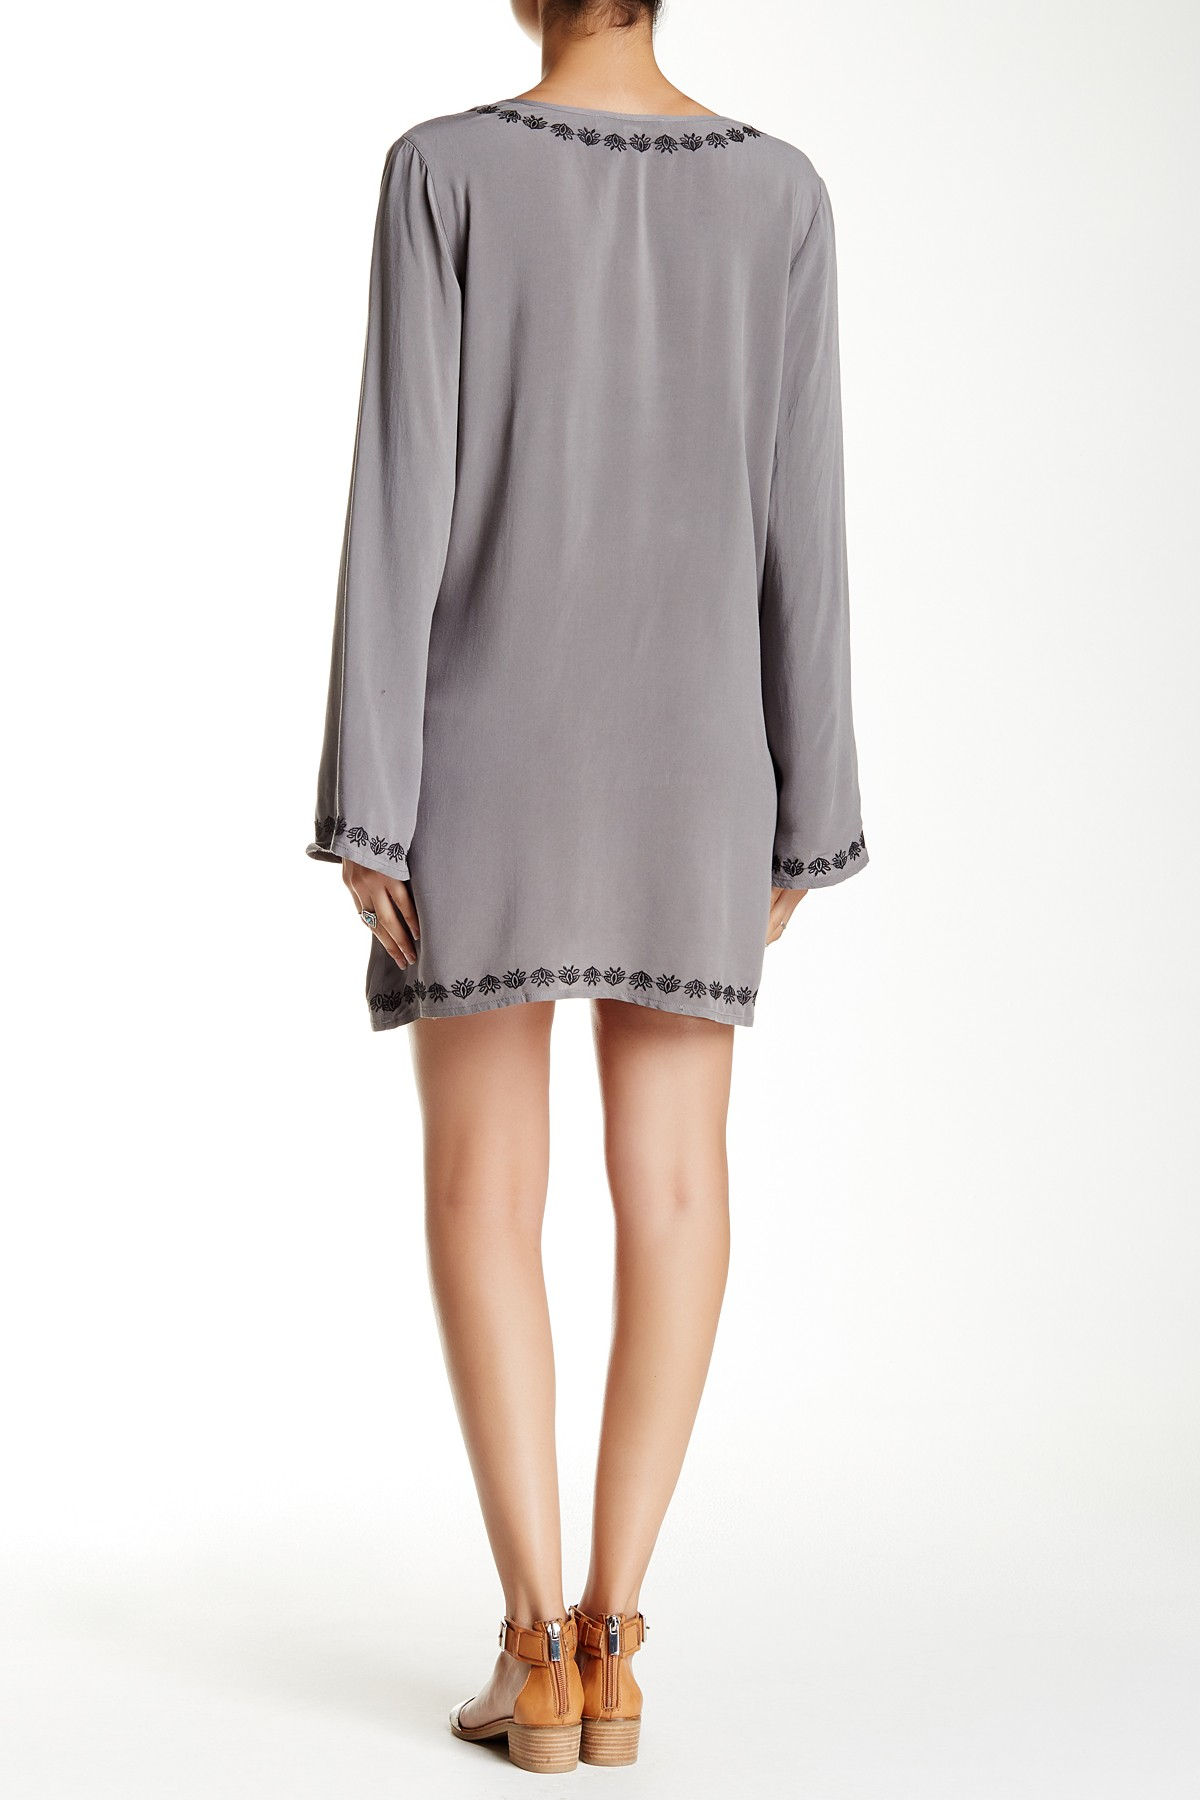 Embroidered Bell Sleeve Dress - Spring Style